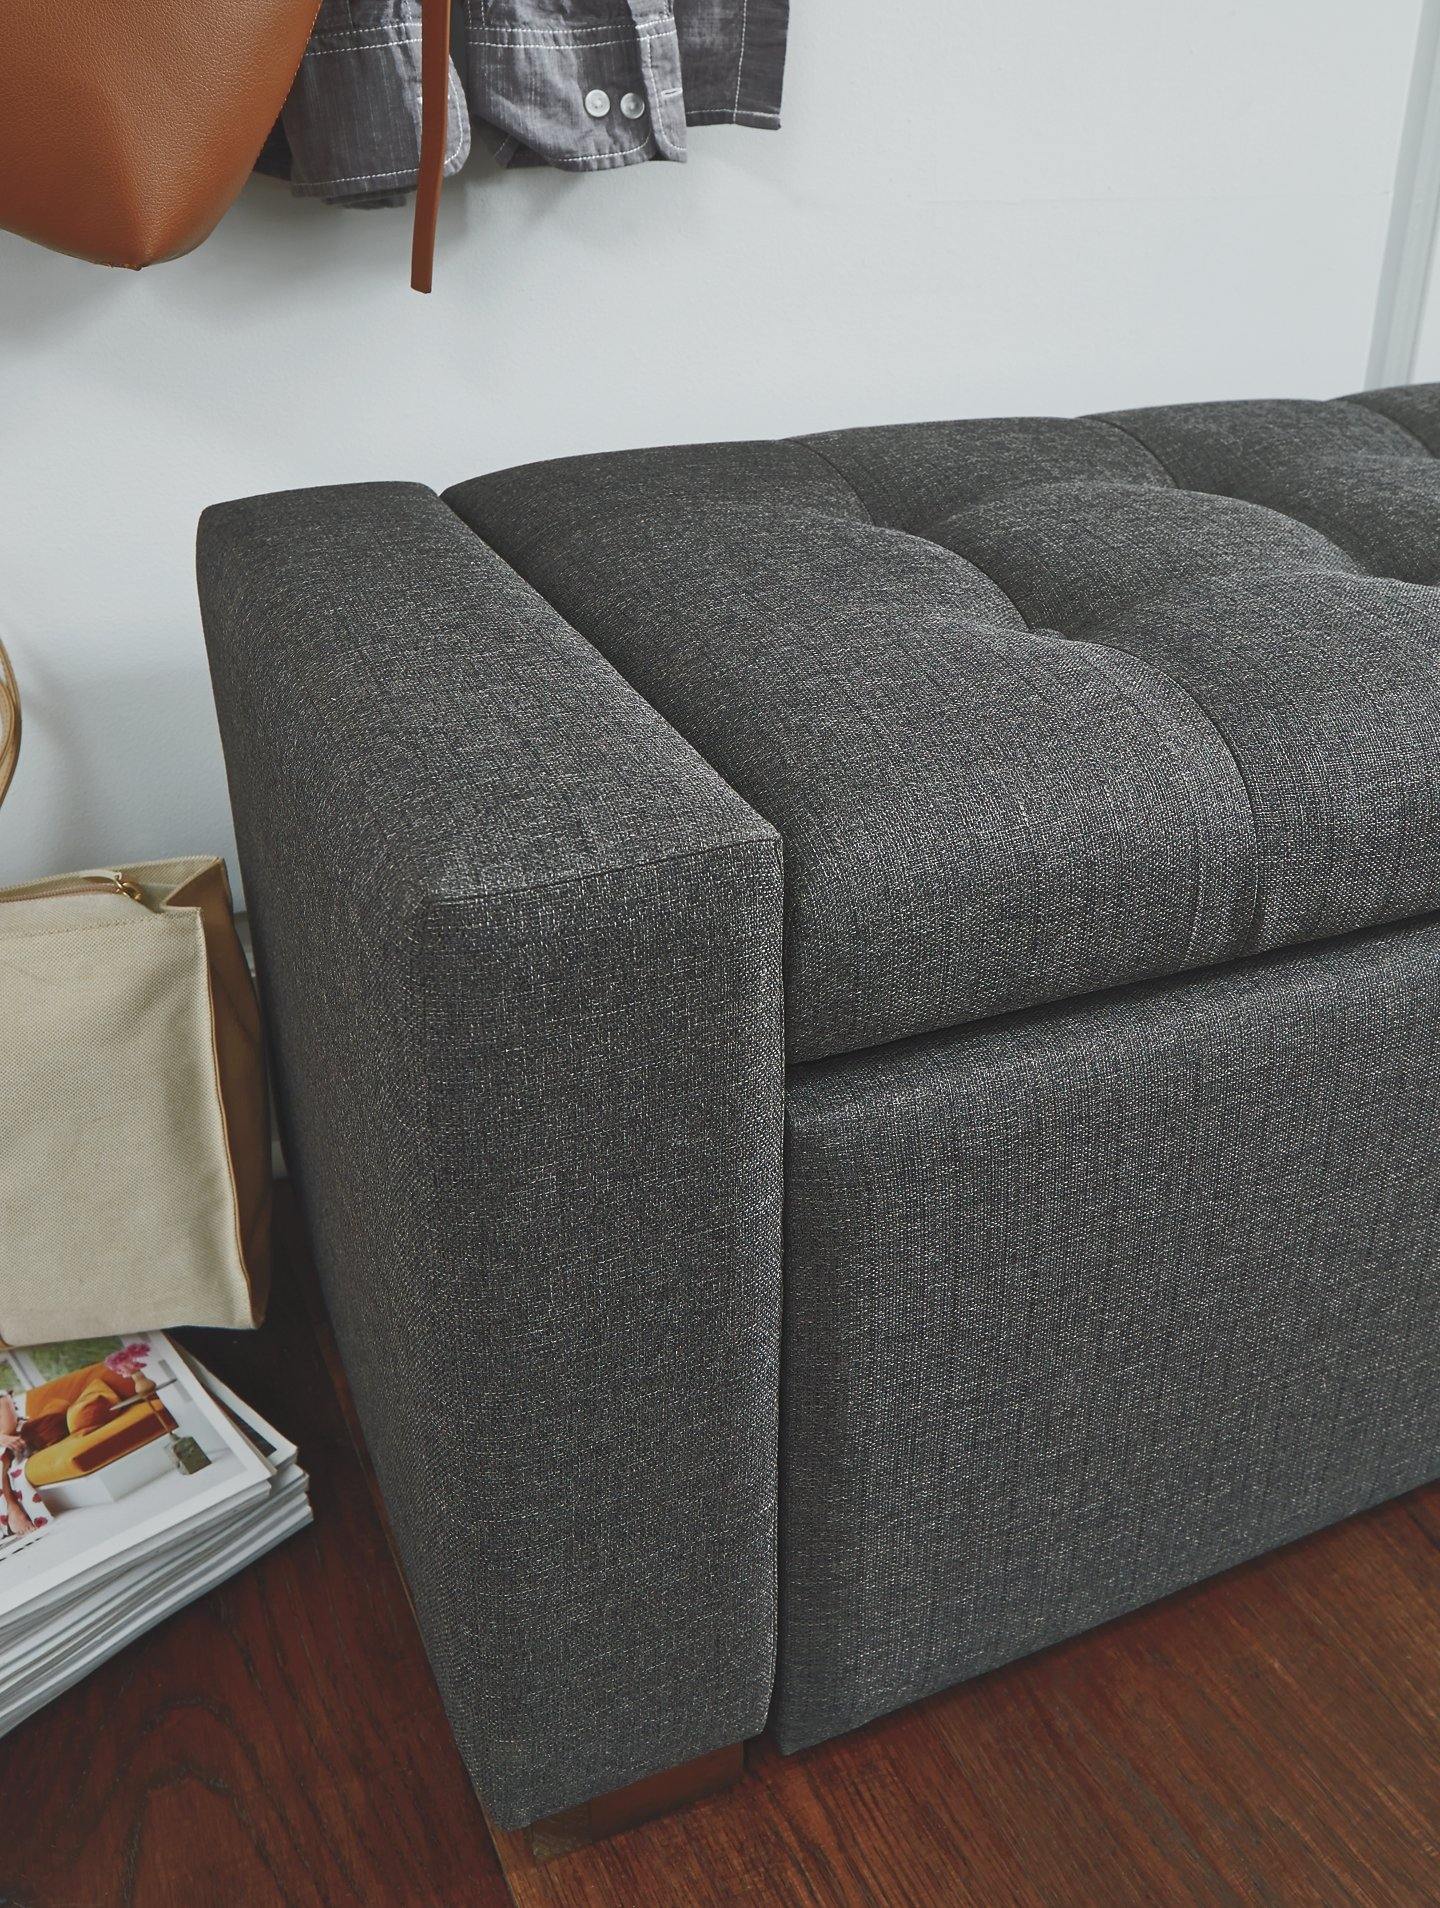 Cortwell Storage Bench A3000224 Gray Casual stationary upholstery accent By ashley - sofafair.com